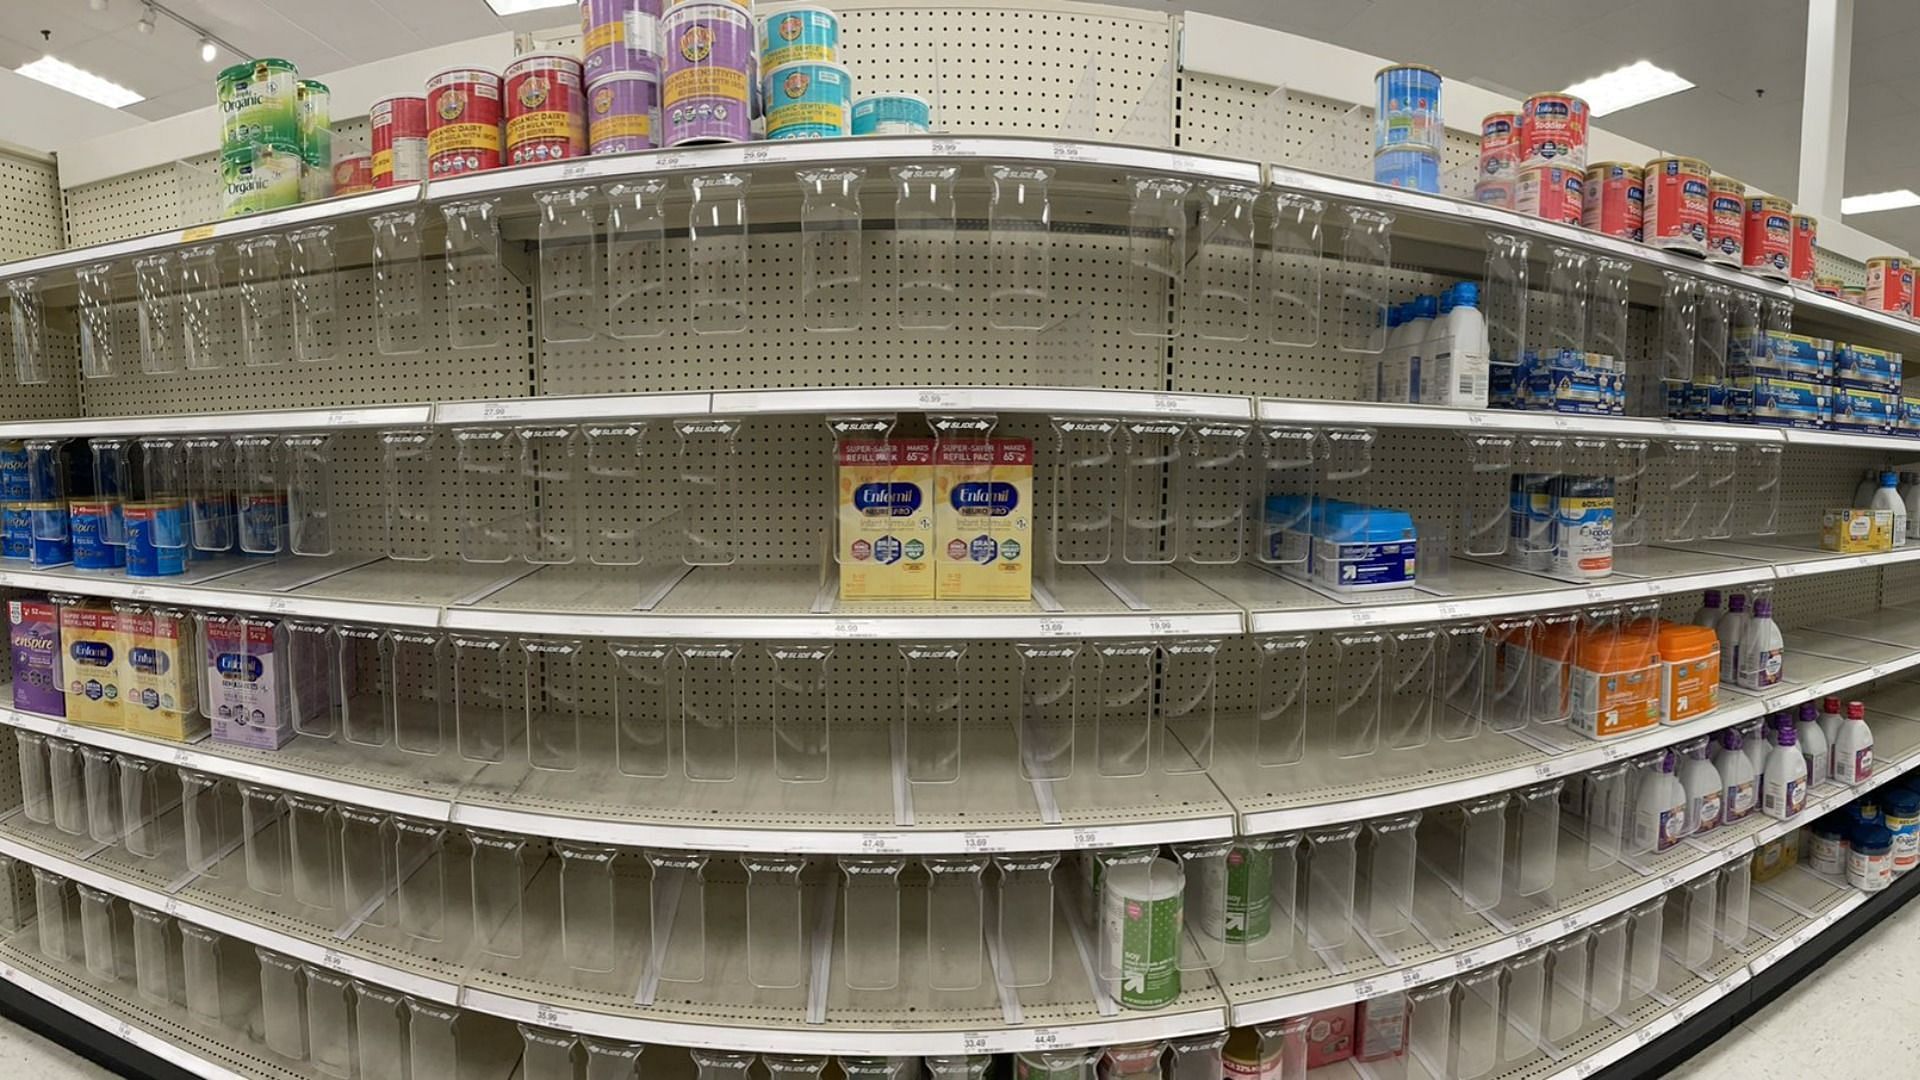 USA&#039;s Baby Formula shortage reaches crisis levels as major brands go out of stock (Image via Danielle Miller/Twitter)